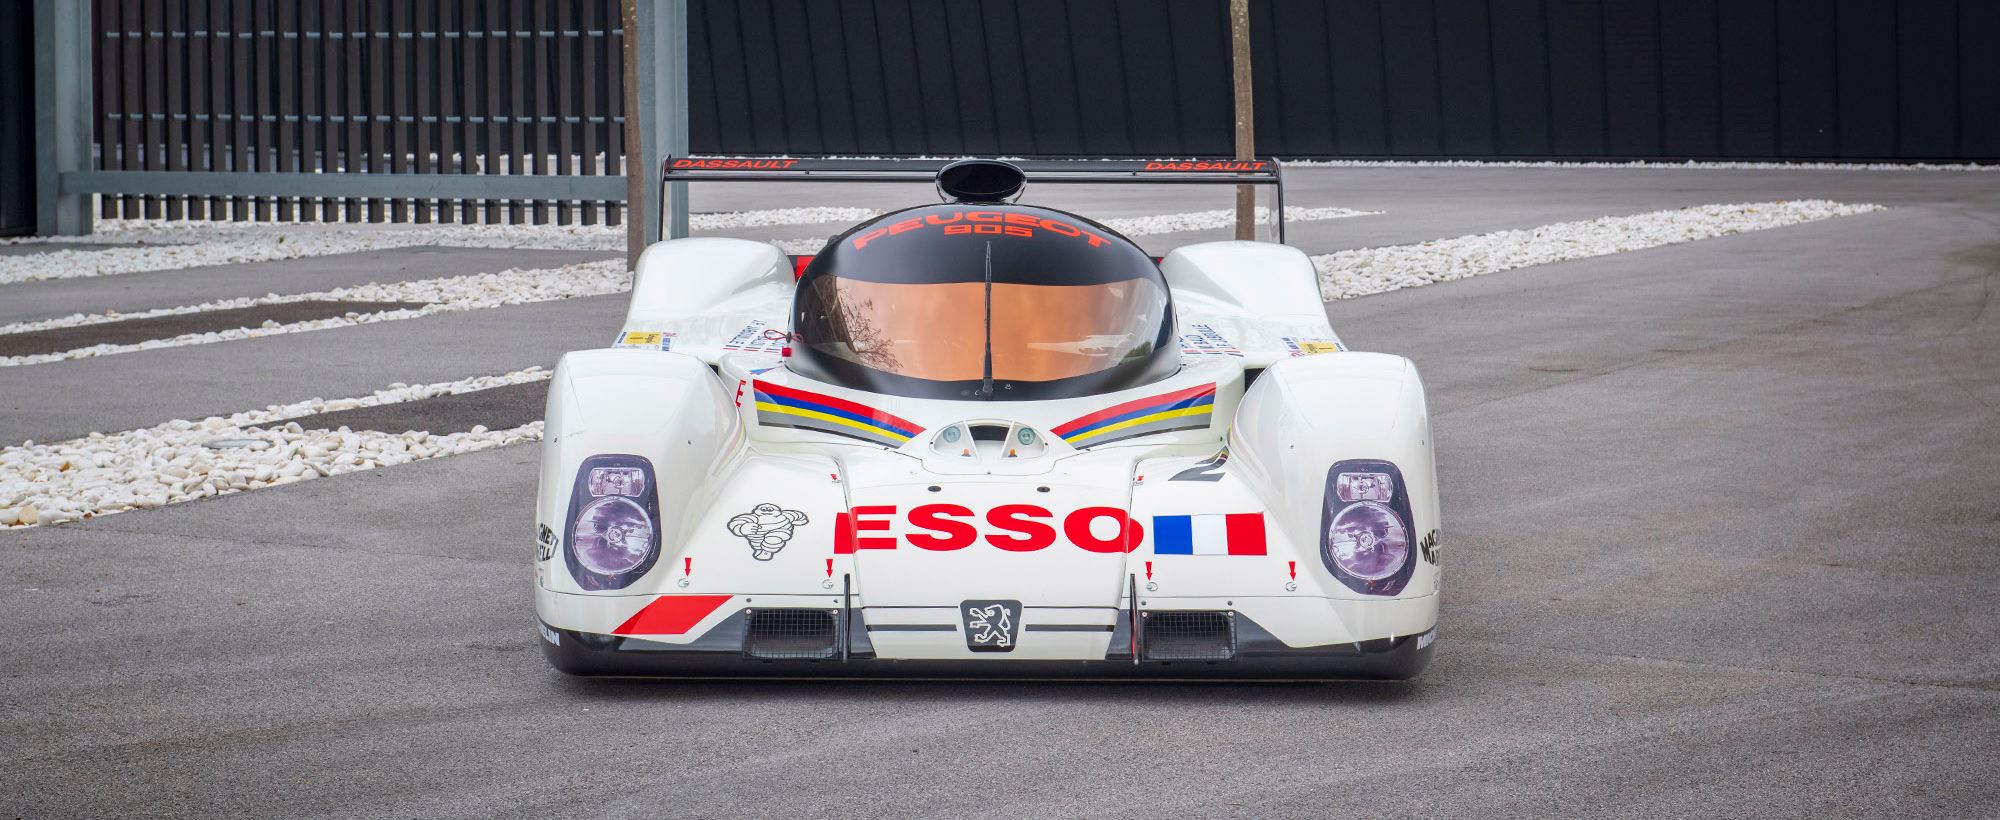 Peugeot 905 Evo 1 first ever 905 built, 1993 Le Mans pole car, and third place overall Hamilton ROFGO